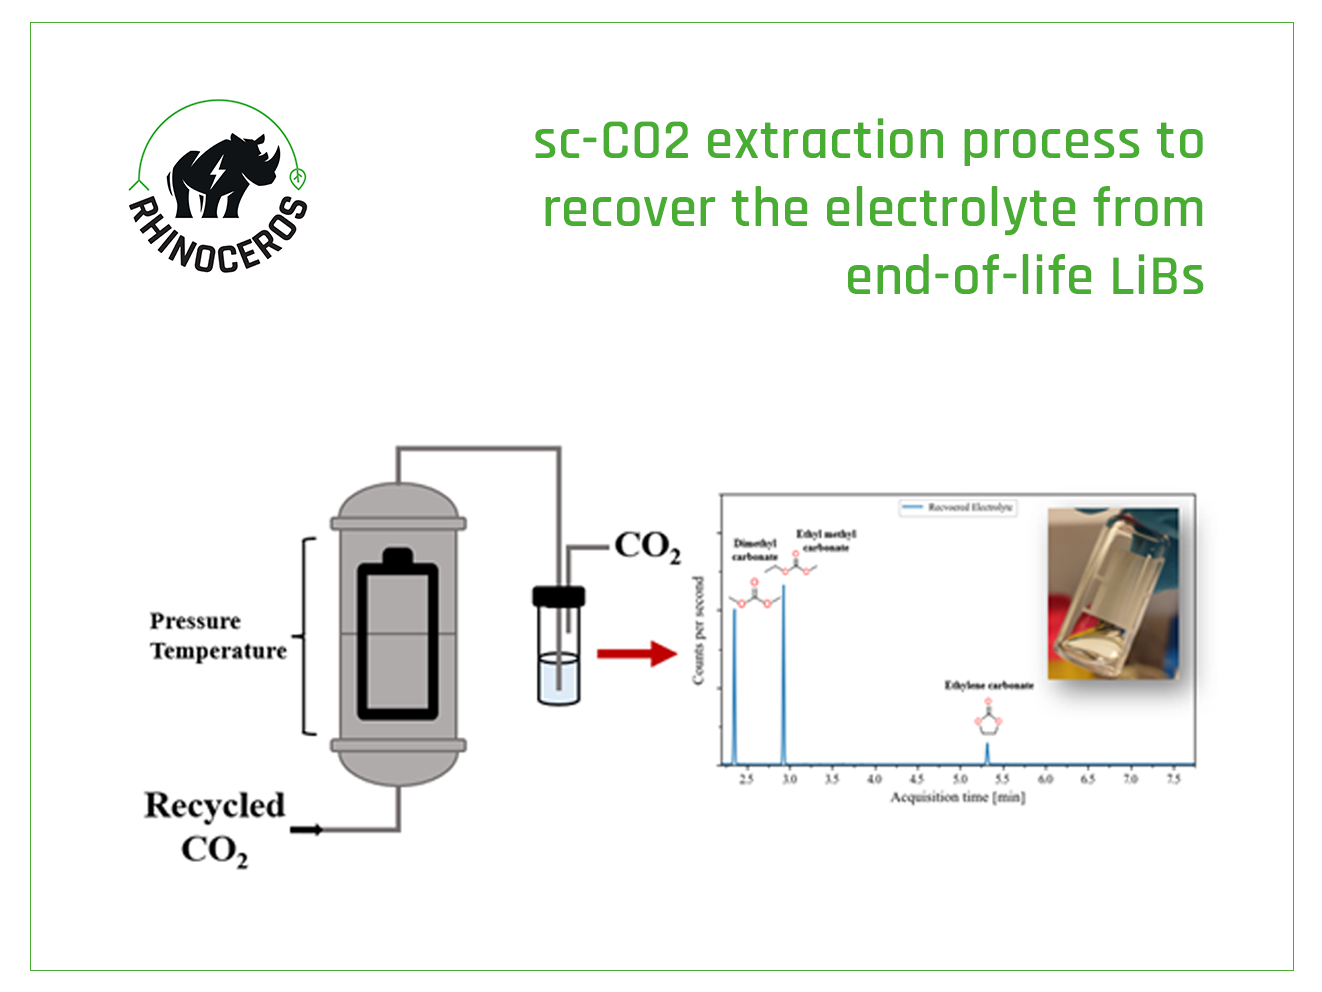 Supercritical CO2 technology for recycling spent LIBs